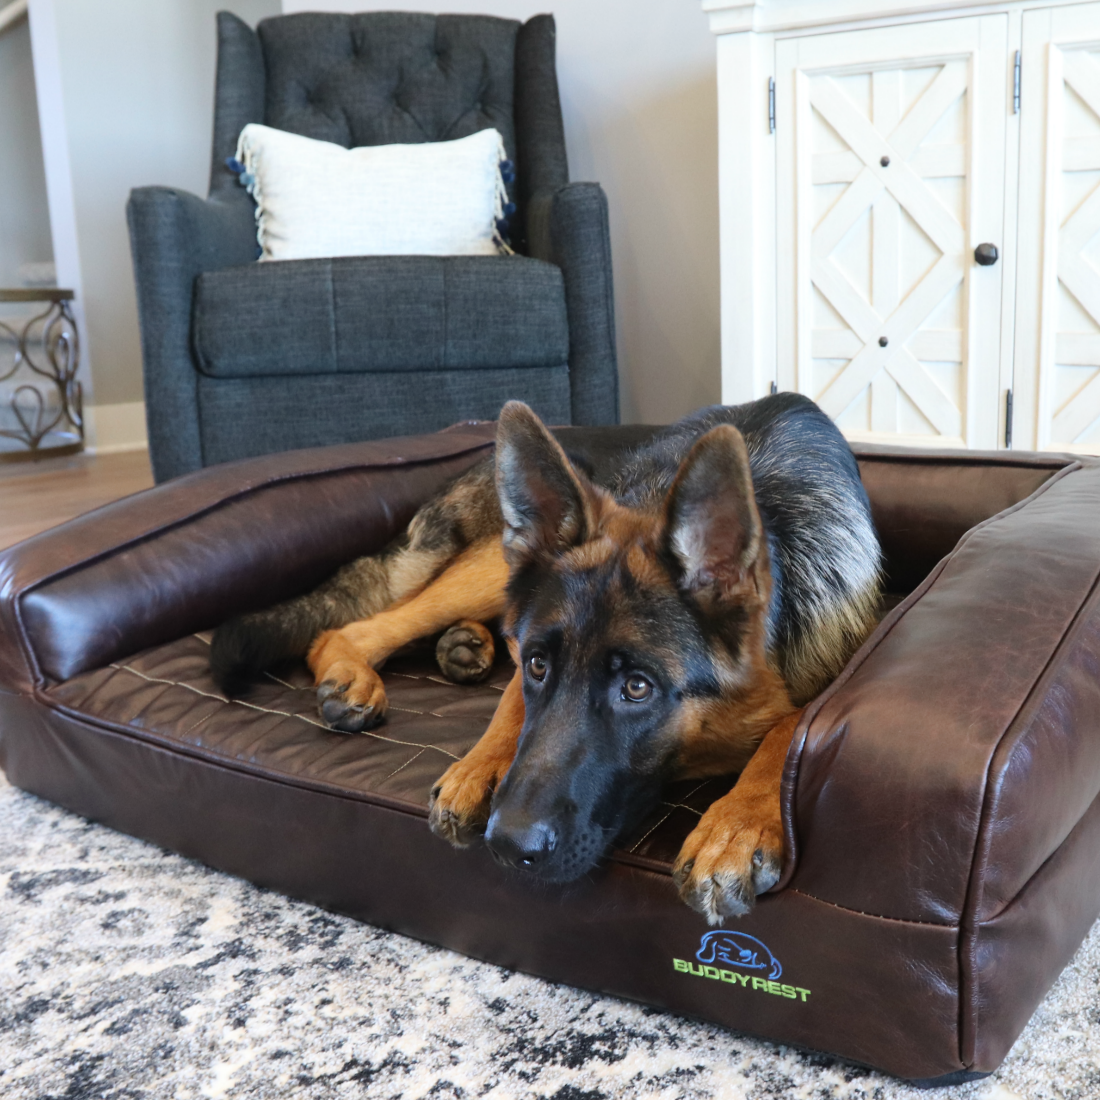 A large brown lag on a BuddyRest mattress designed for dogs.  